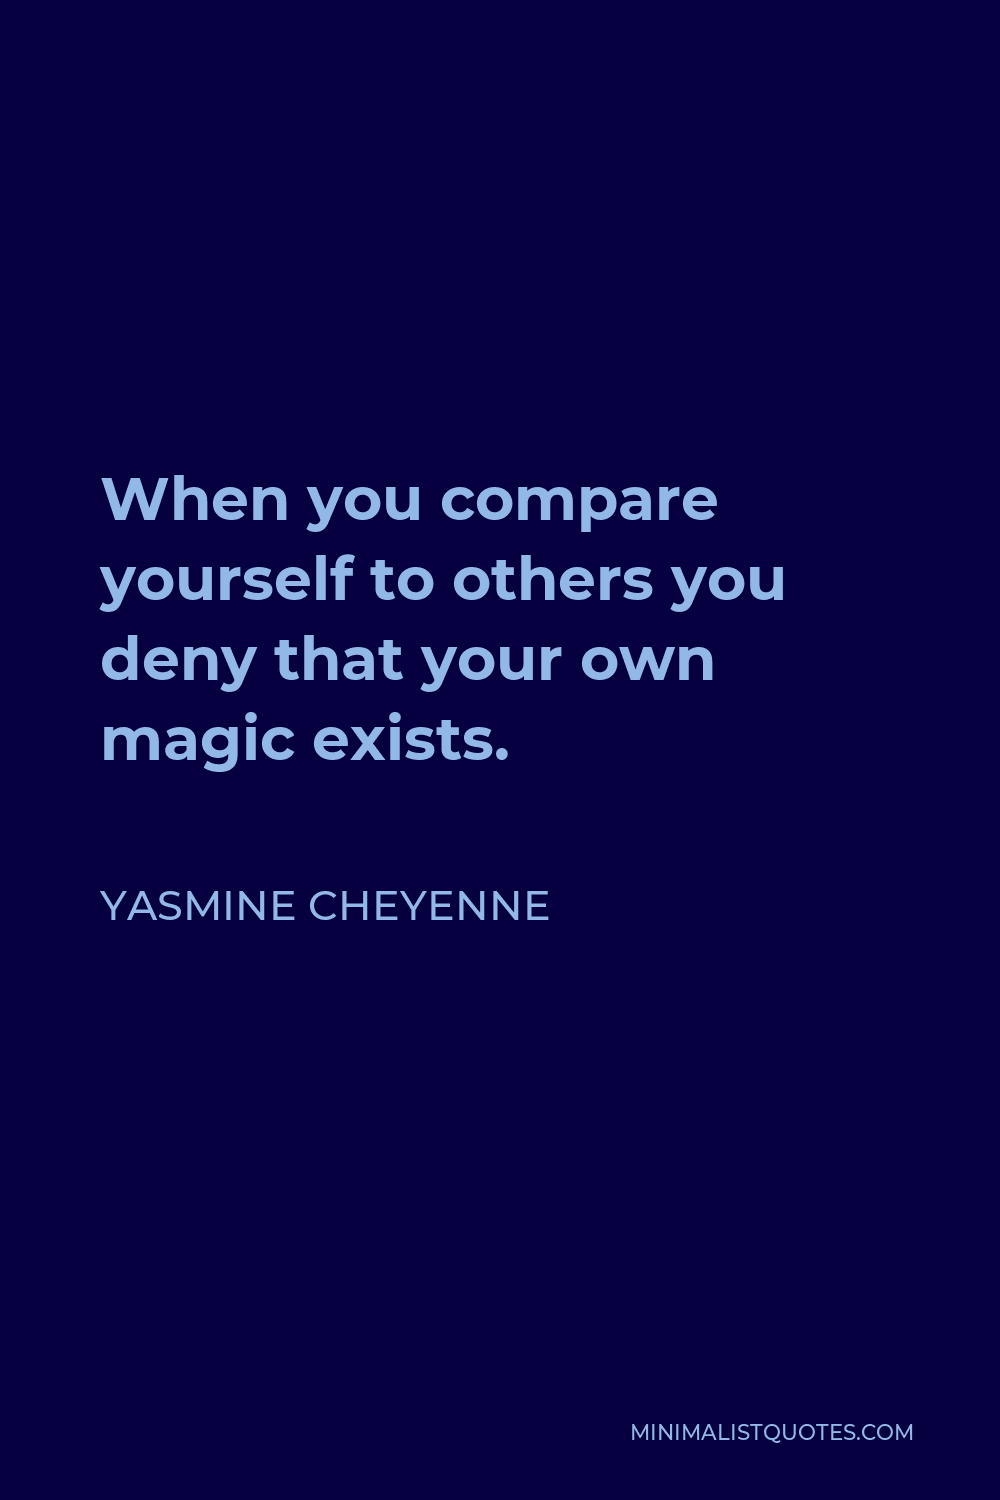 Yasmine Cheyenne Quote - When you compare yourself to others you deny that your own magic exists.